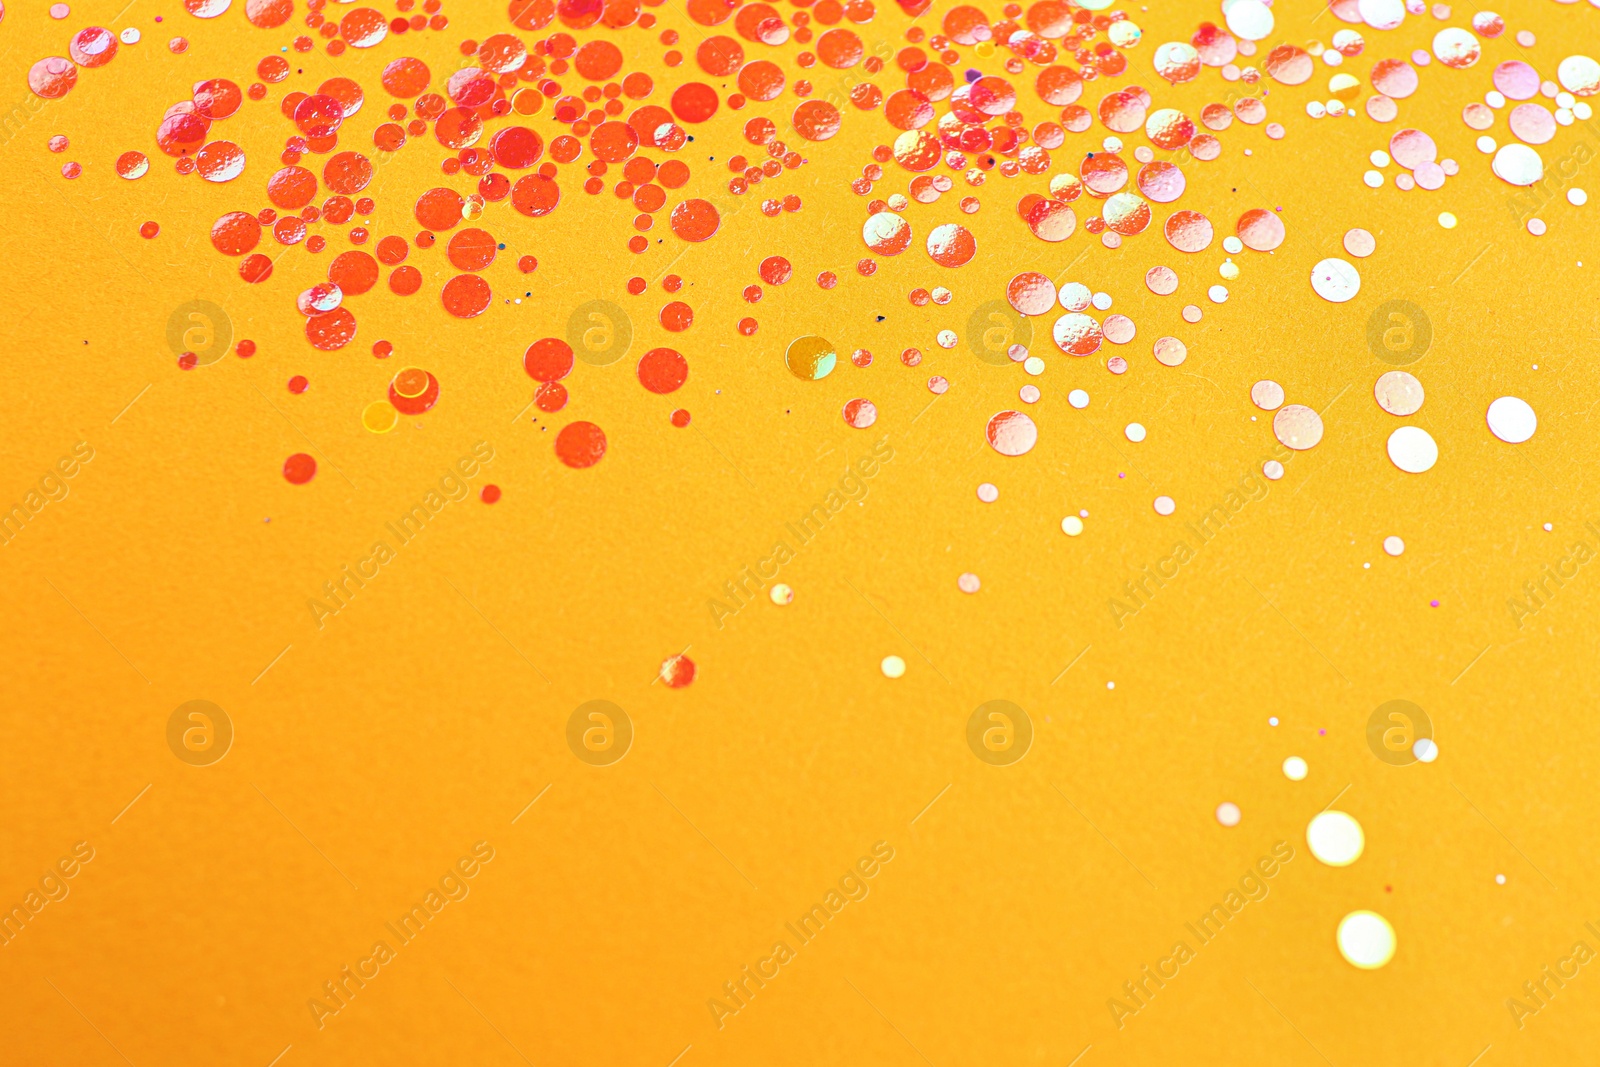 Photo of Shiny bright red glitter on pale orange background. Space for text